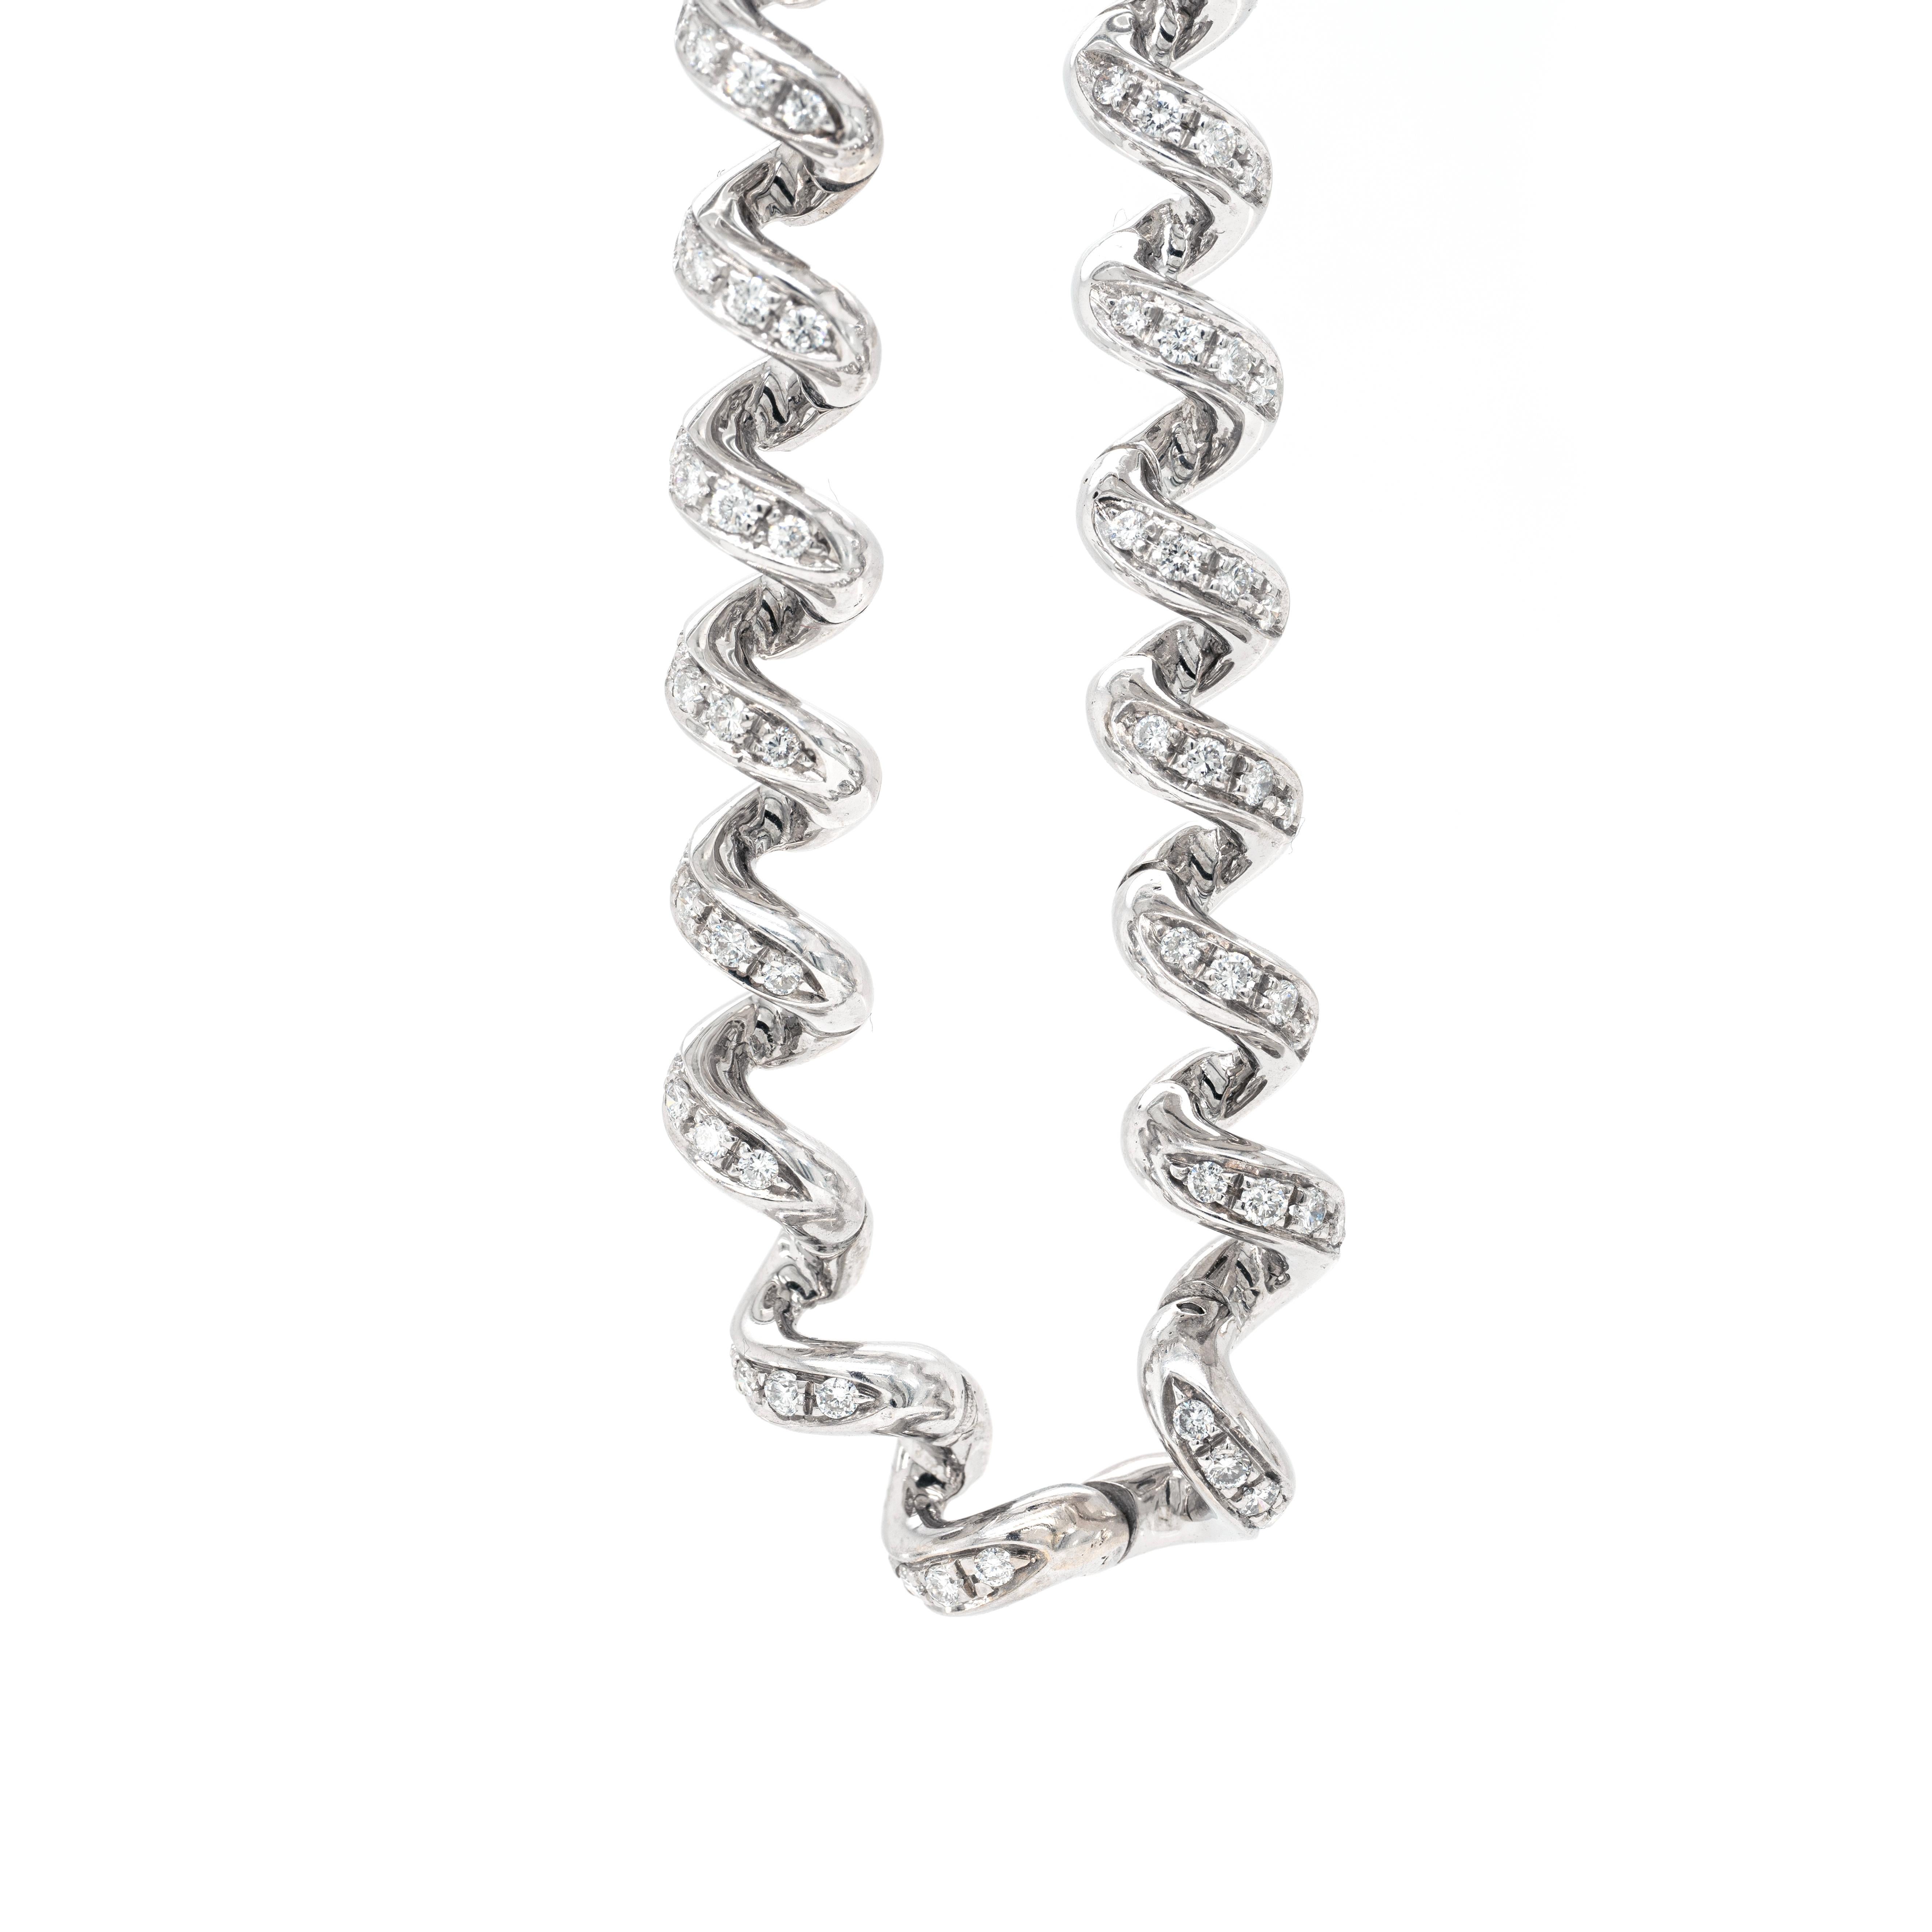 This gorgeous necklace by Boucheron is crafted from 18 carat white gold and designed with high-polished twist shaped links that are masterfully connected to ensure supreme comfort when worn around the neck. Each link is beautifully inlaid with 4